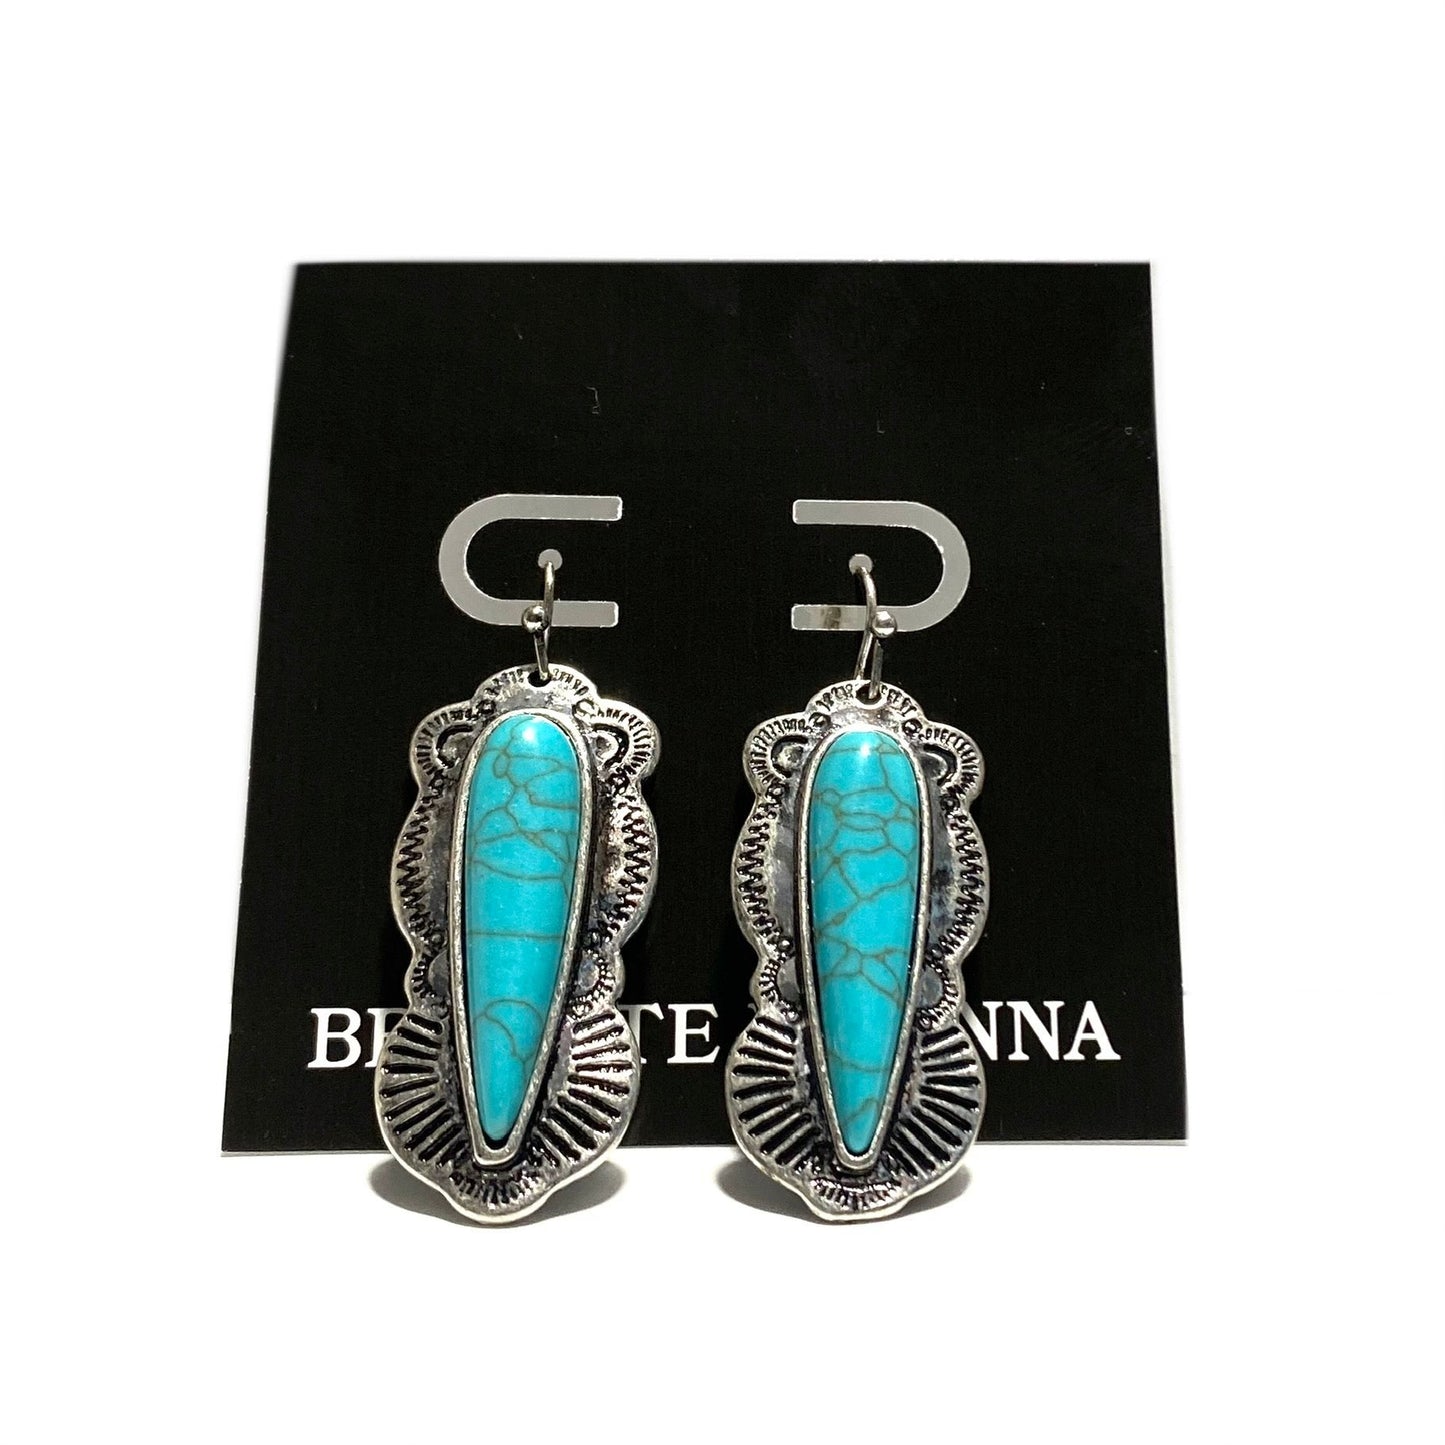 Antiqued Silver & Turquoise Stone Drop Earrings